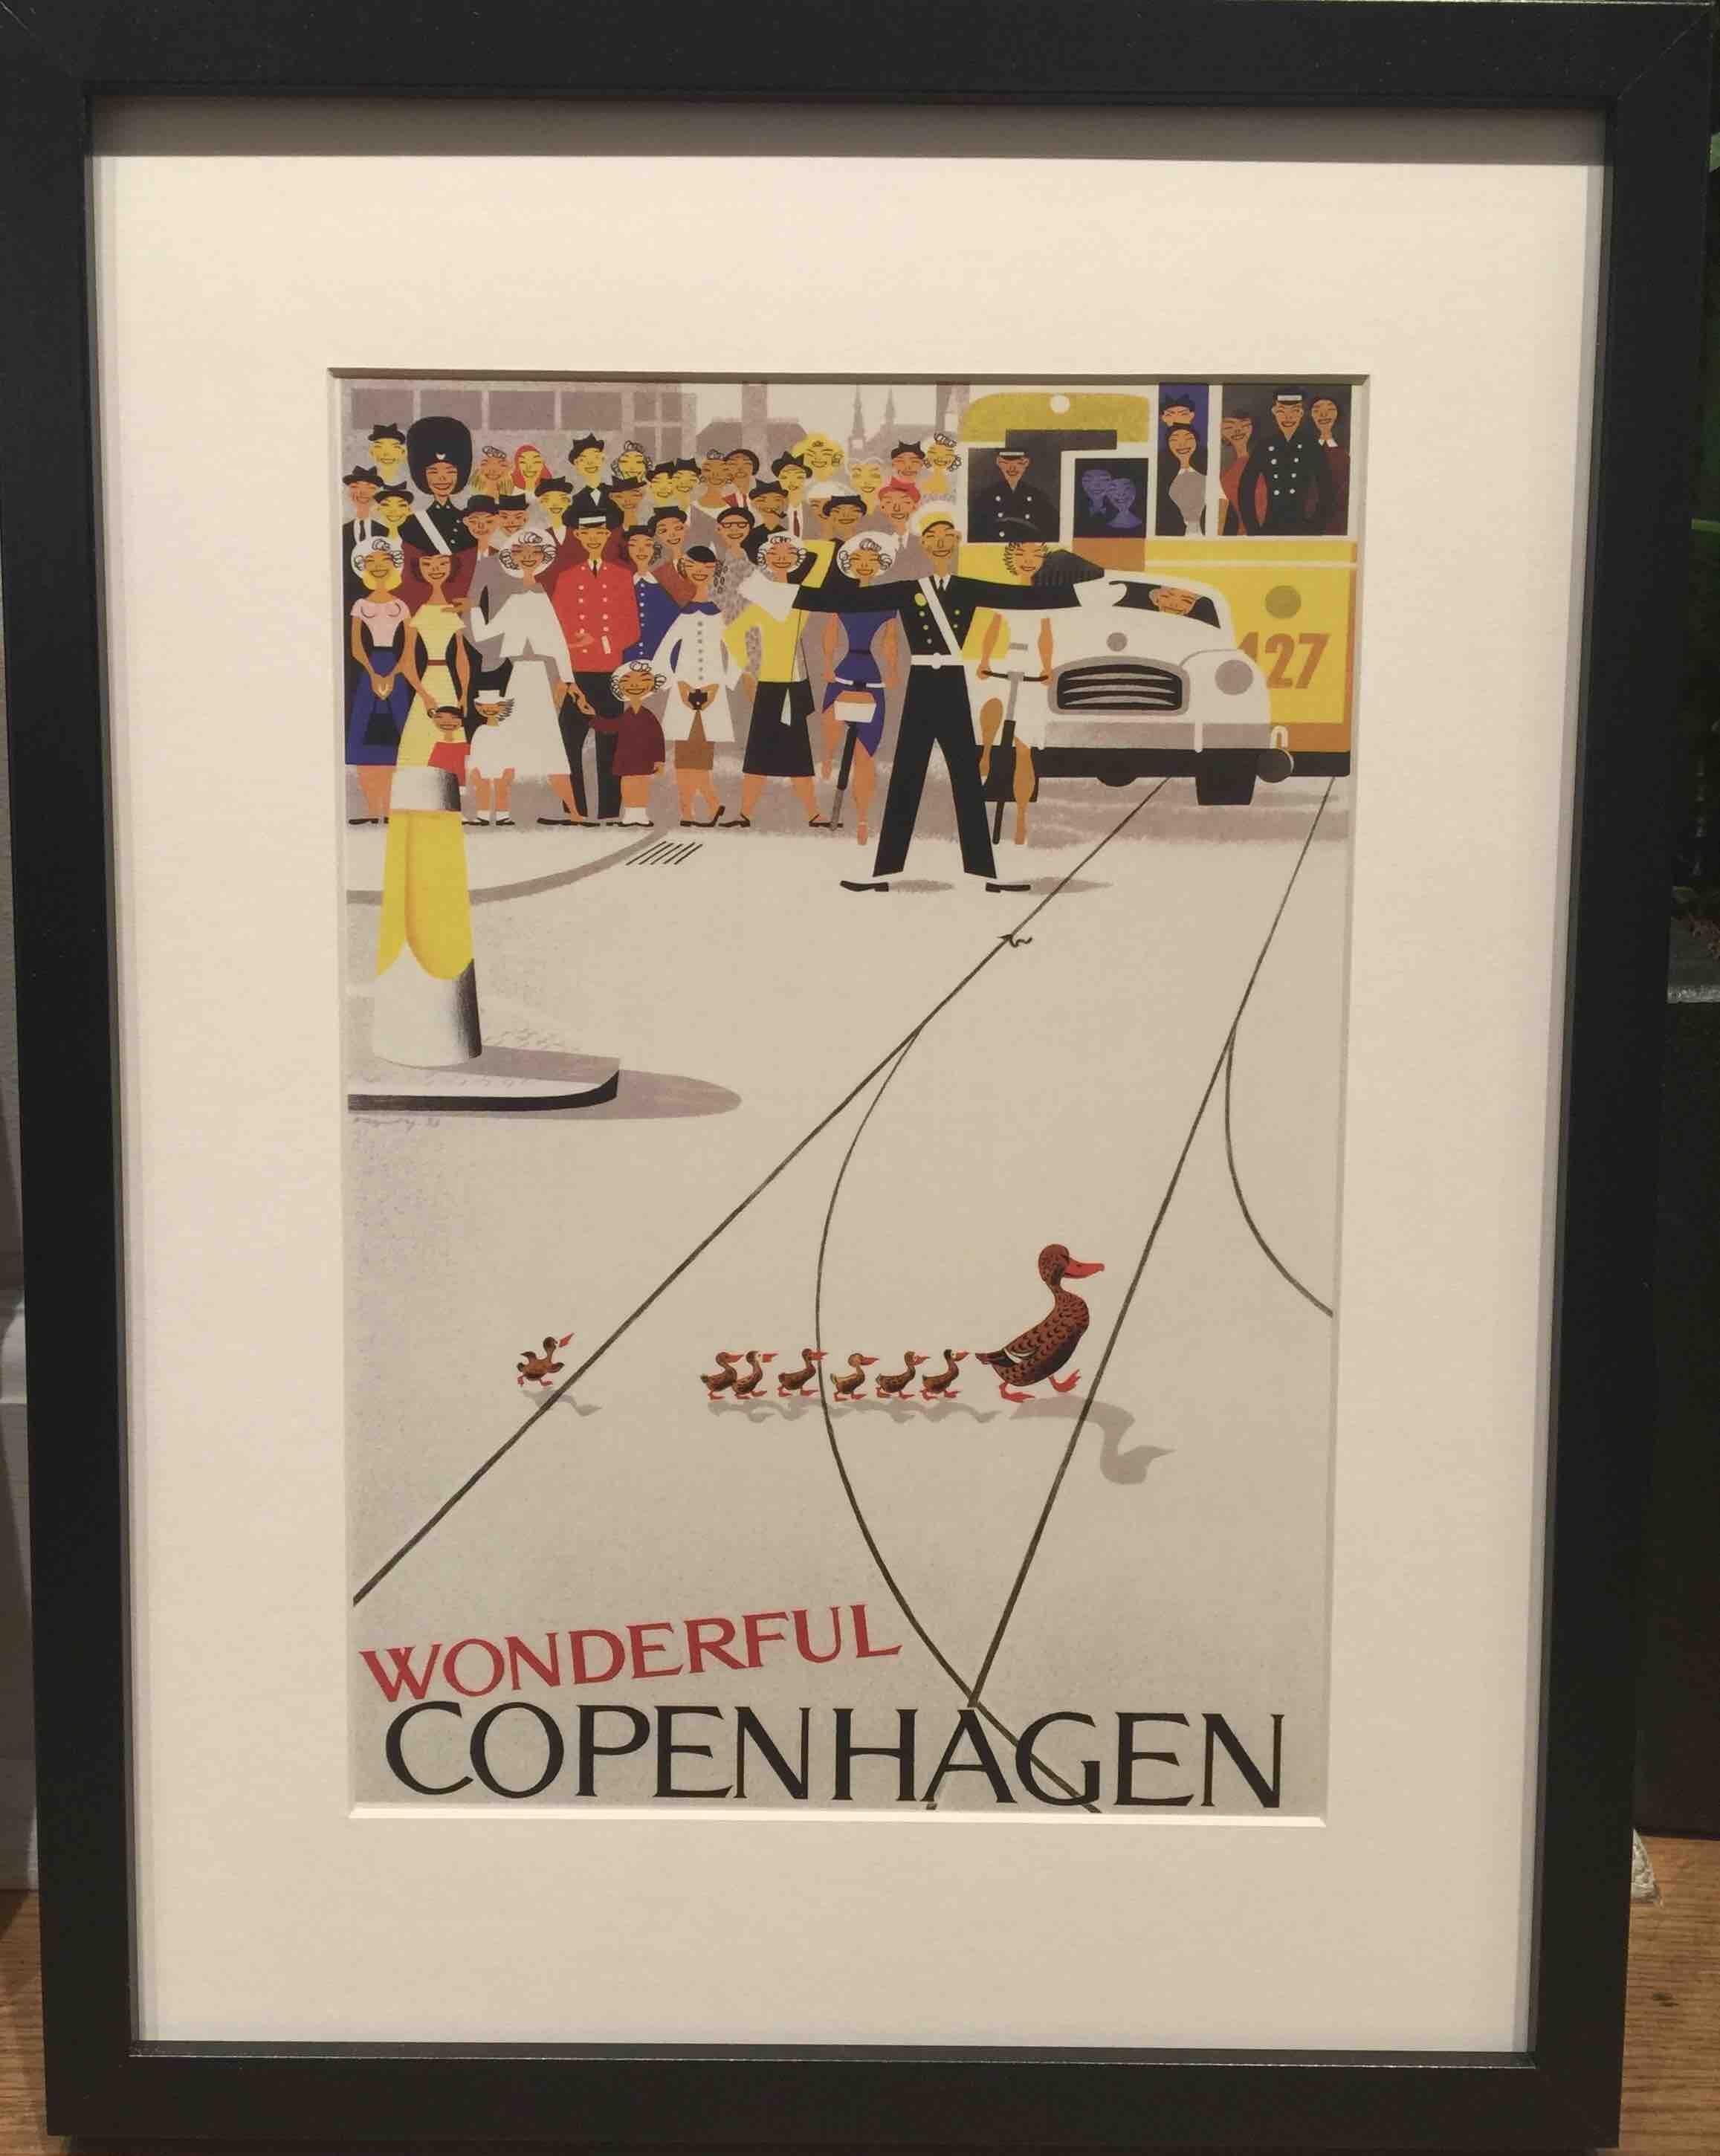 Buy Wonderful Poster with - Offer: 79,00DKK,-